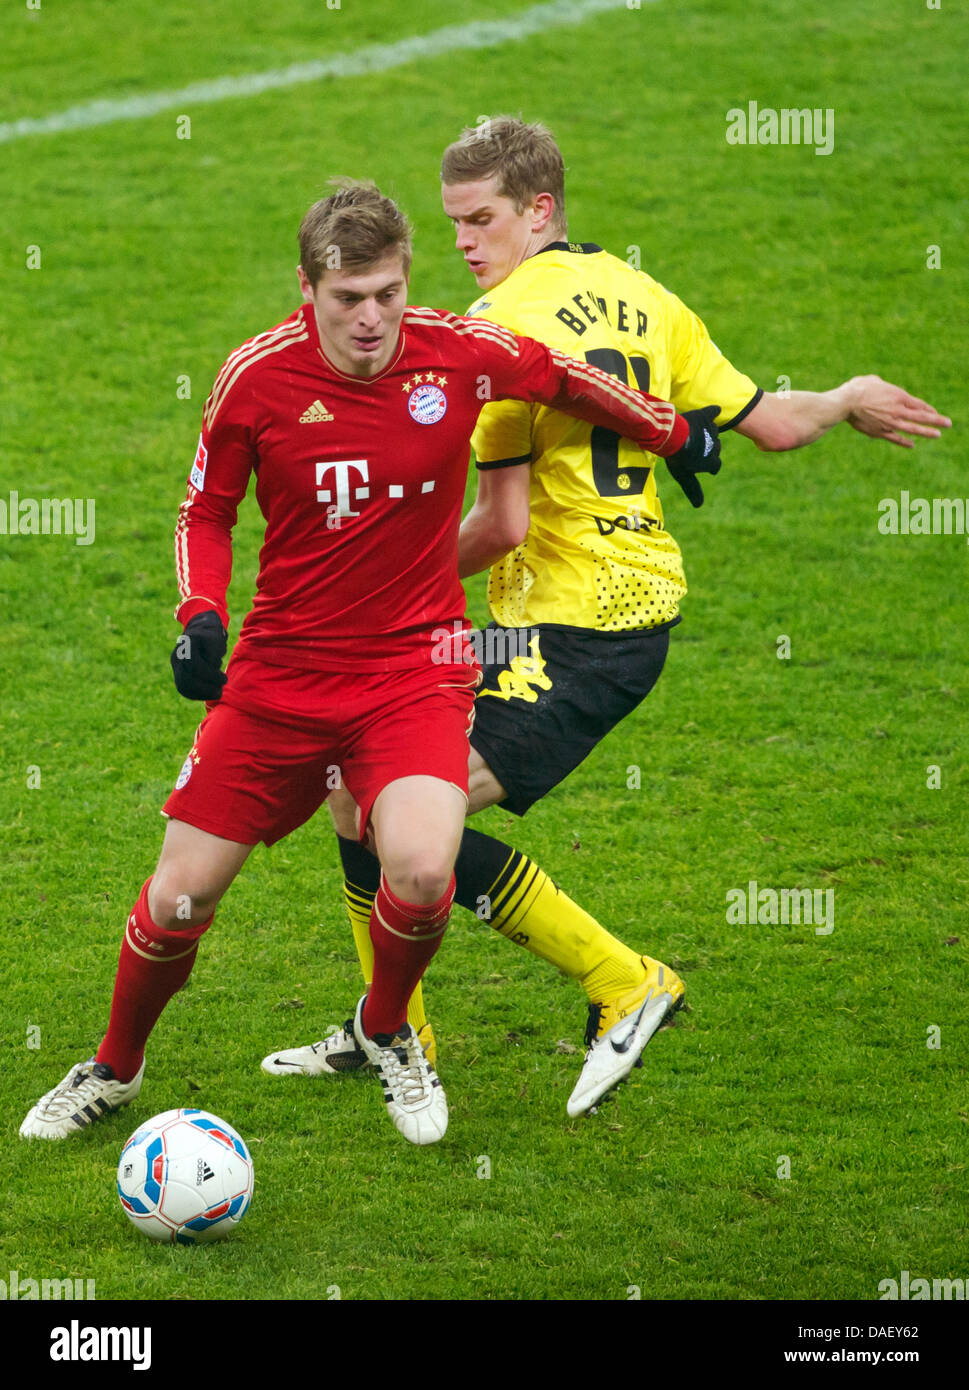 Munich's Toni Kroos (L) and Dortmund's Sven Bender vie for the ball with  during the German Bundesliga match between Bayern Munich and Borussia  Dortmund at the Allianz-Arena in Munich, Germany, 19 November